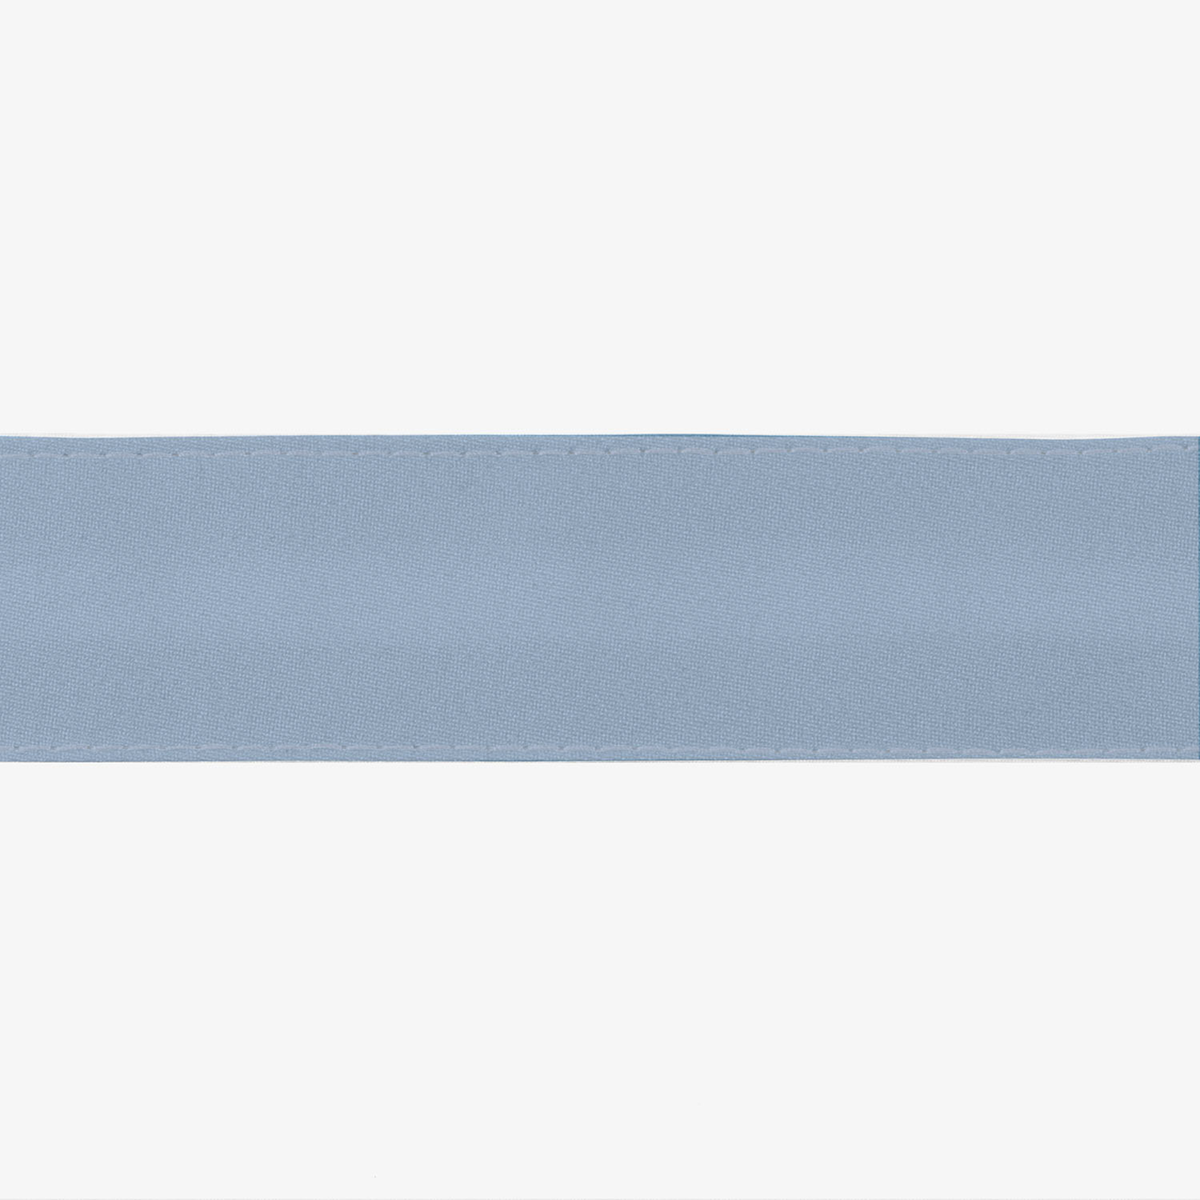 Matouk Lowell Bedding Collection Hazy Blue Swatch Fine Linens